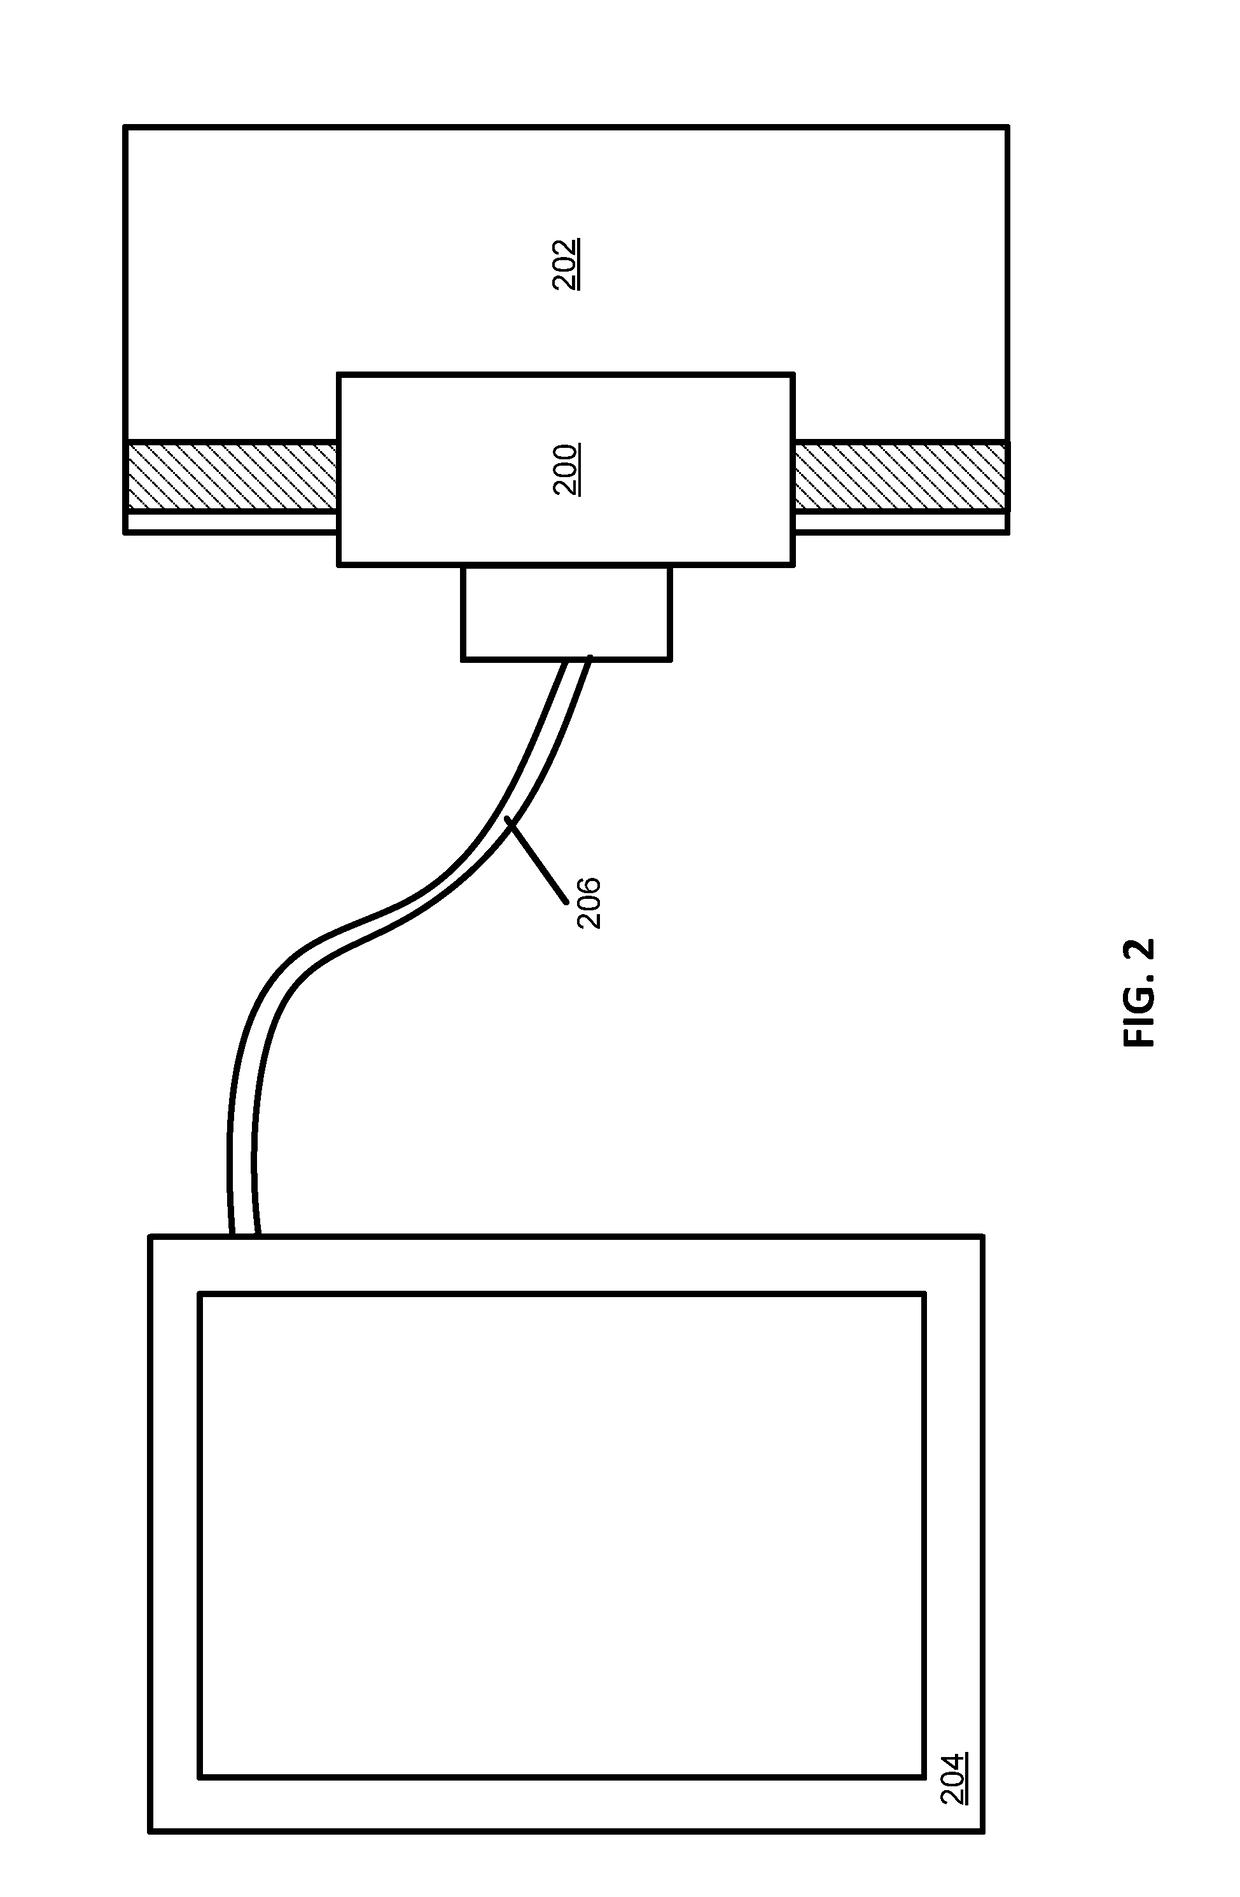 Systems and methods for user identification using graphical barcode and payment card authentication read data